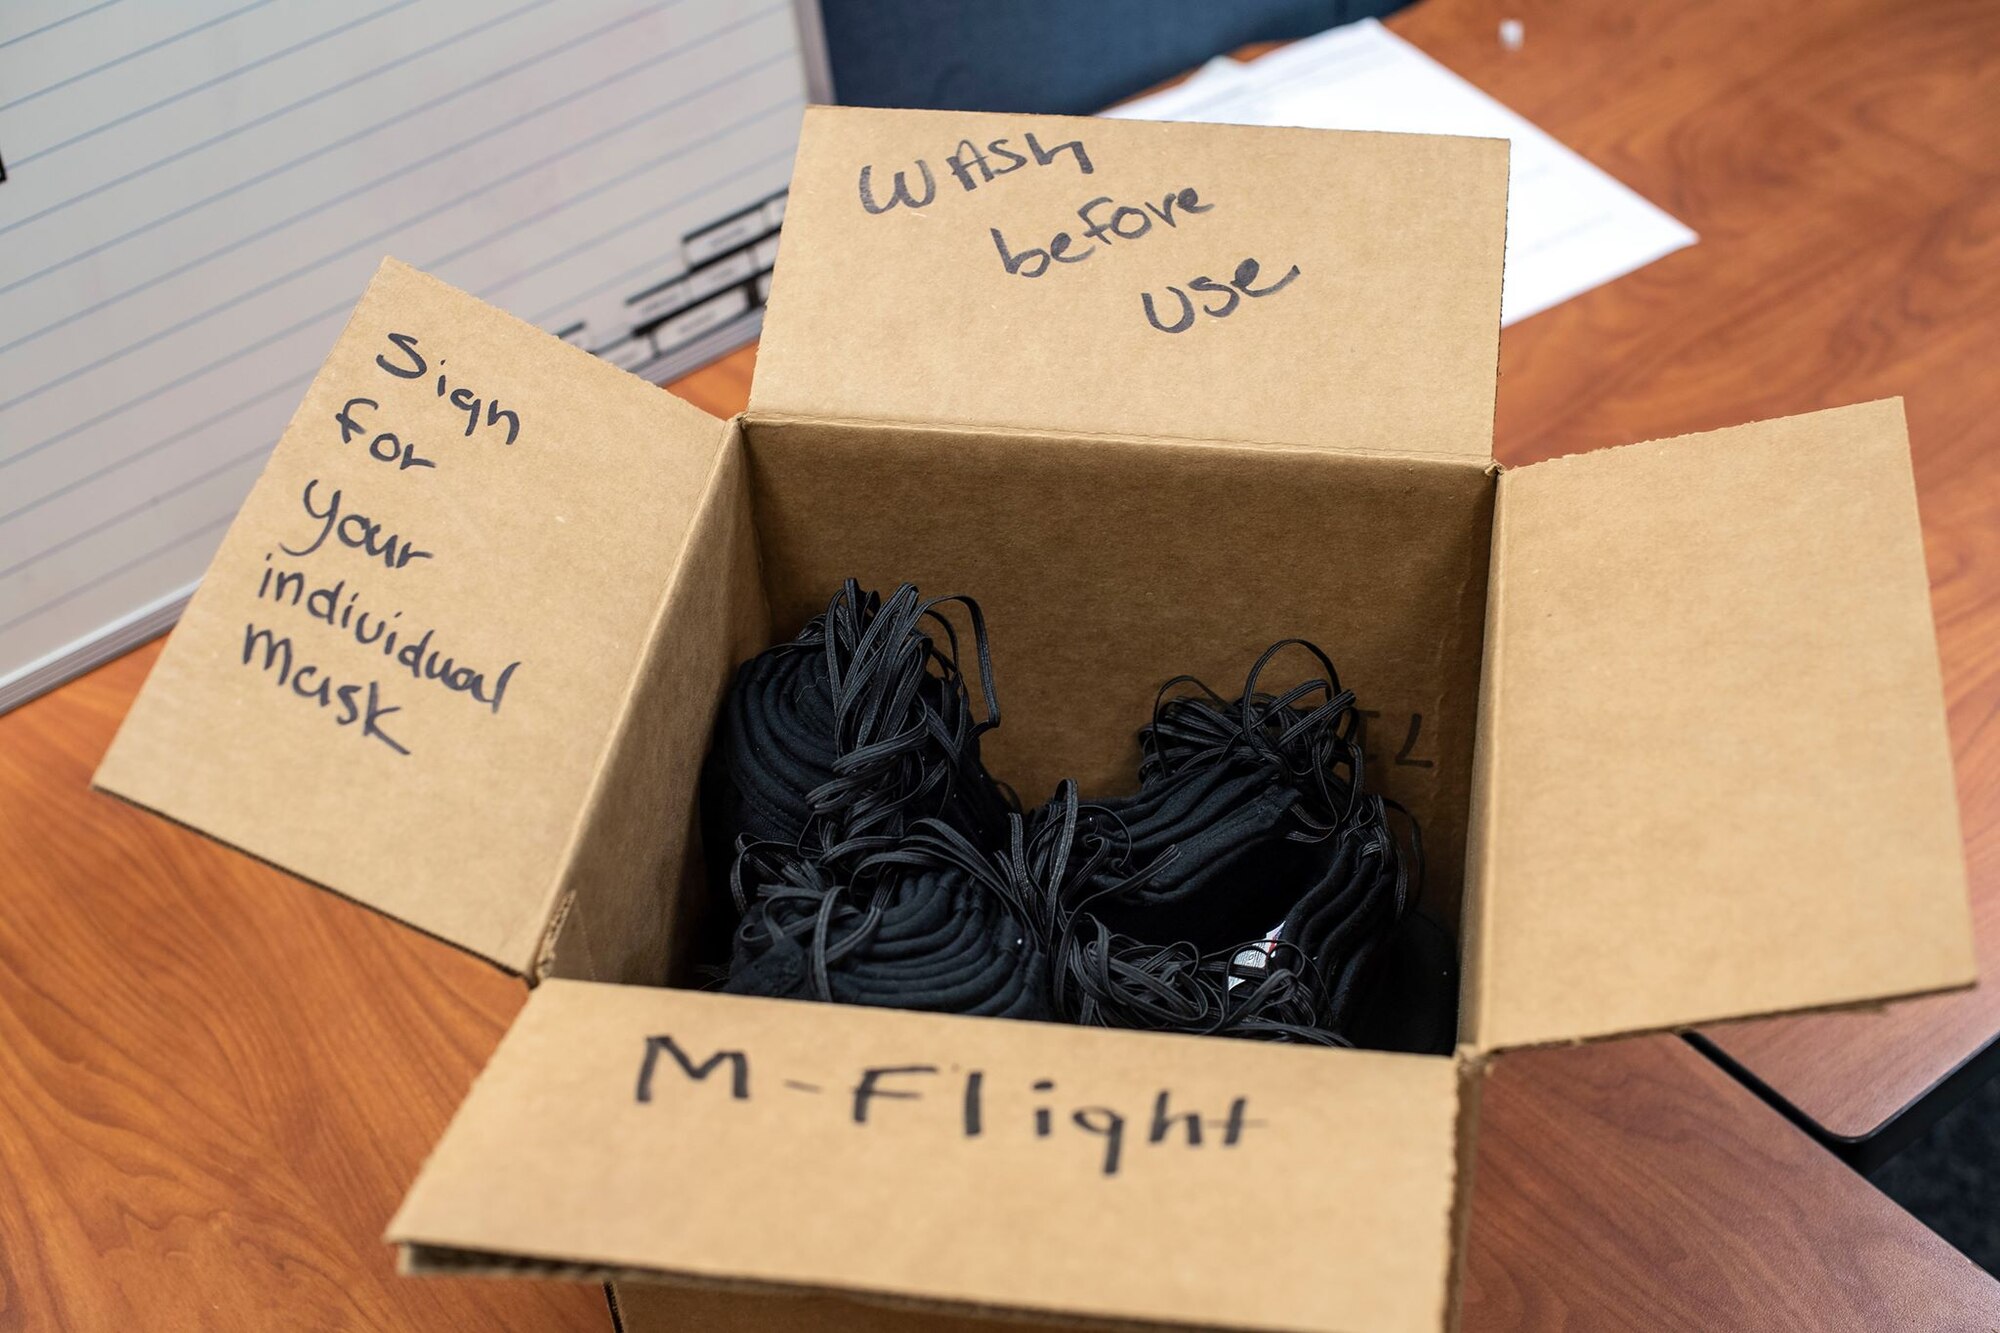 A cardboard box with the phrases "wash before use," "Sign for your individual mask," and "M-Flight" written on it sits on a wooden table with black face masks in it